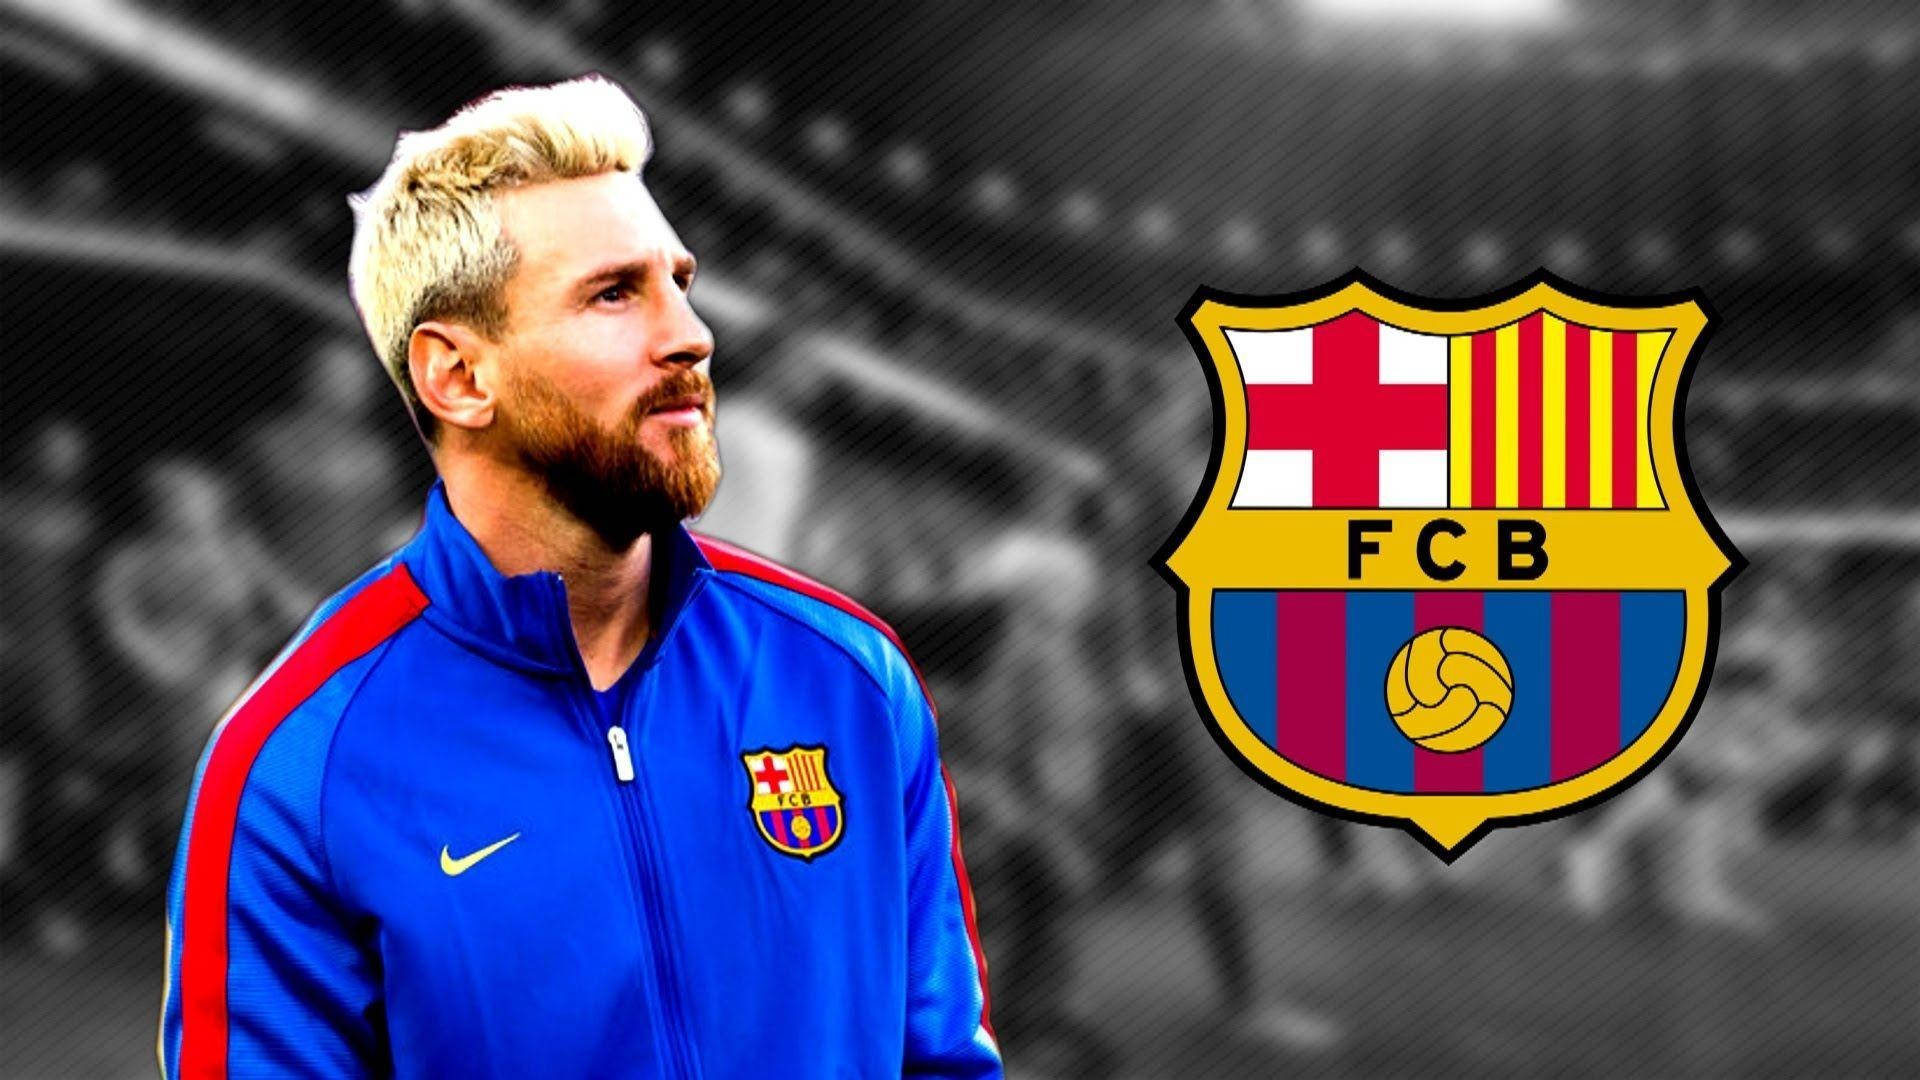 Messi proudly holds up the FC Barcelona logo Wallpaper